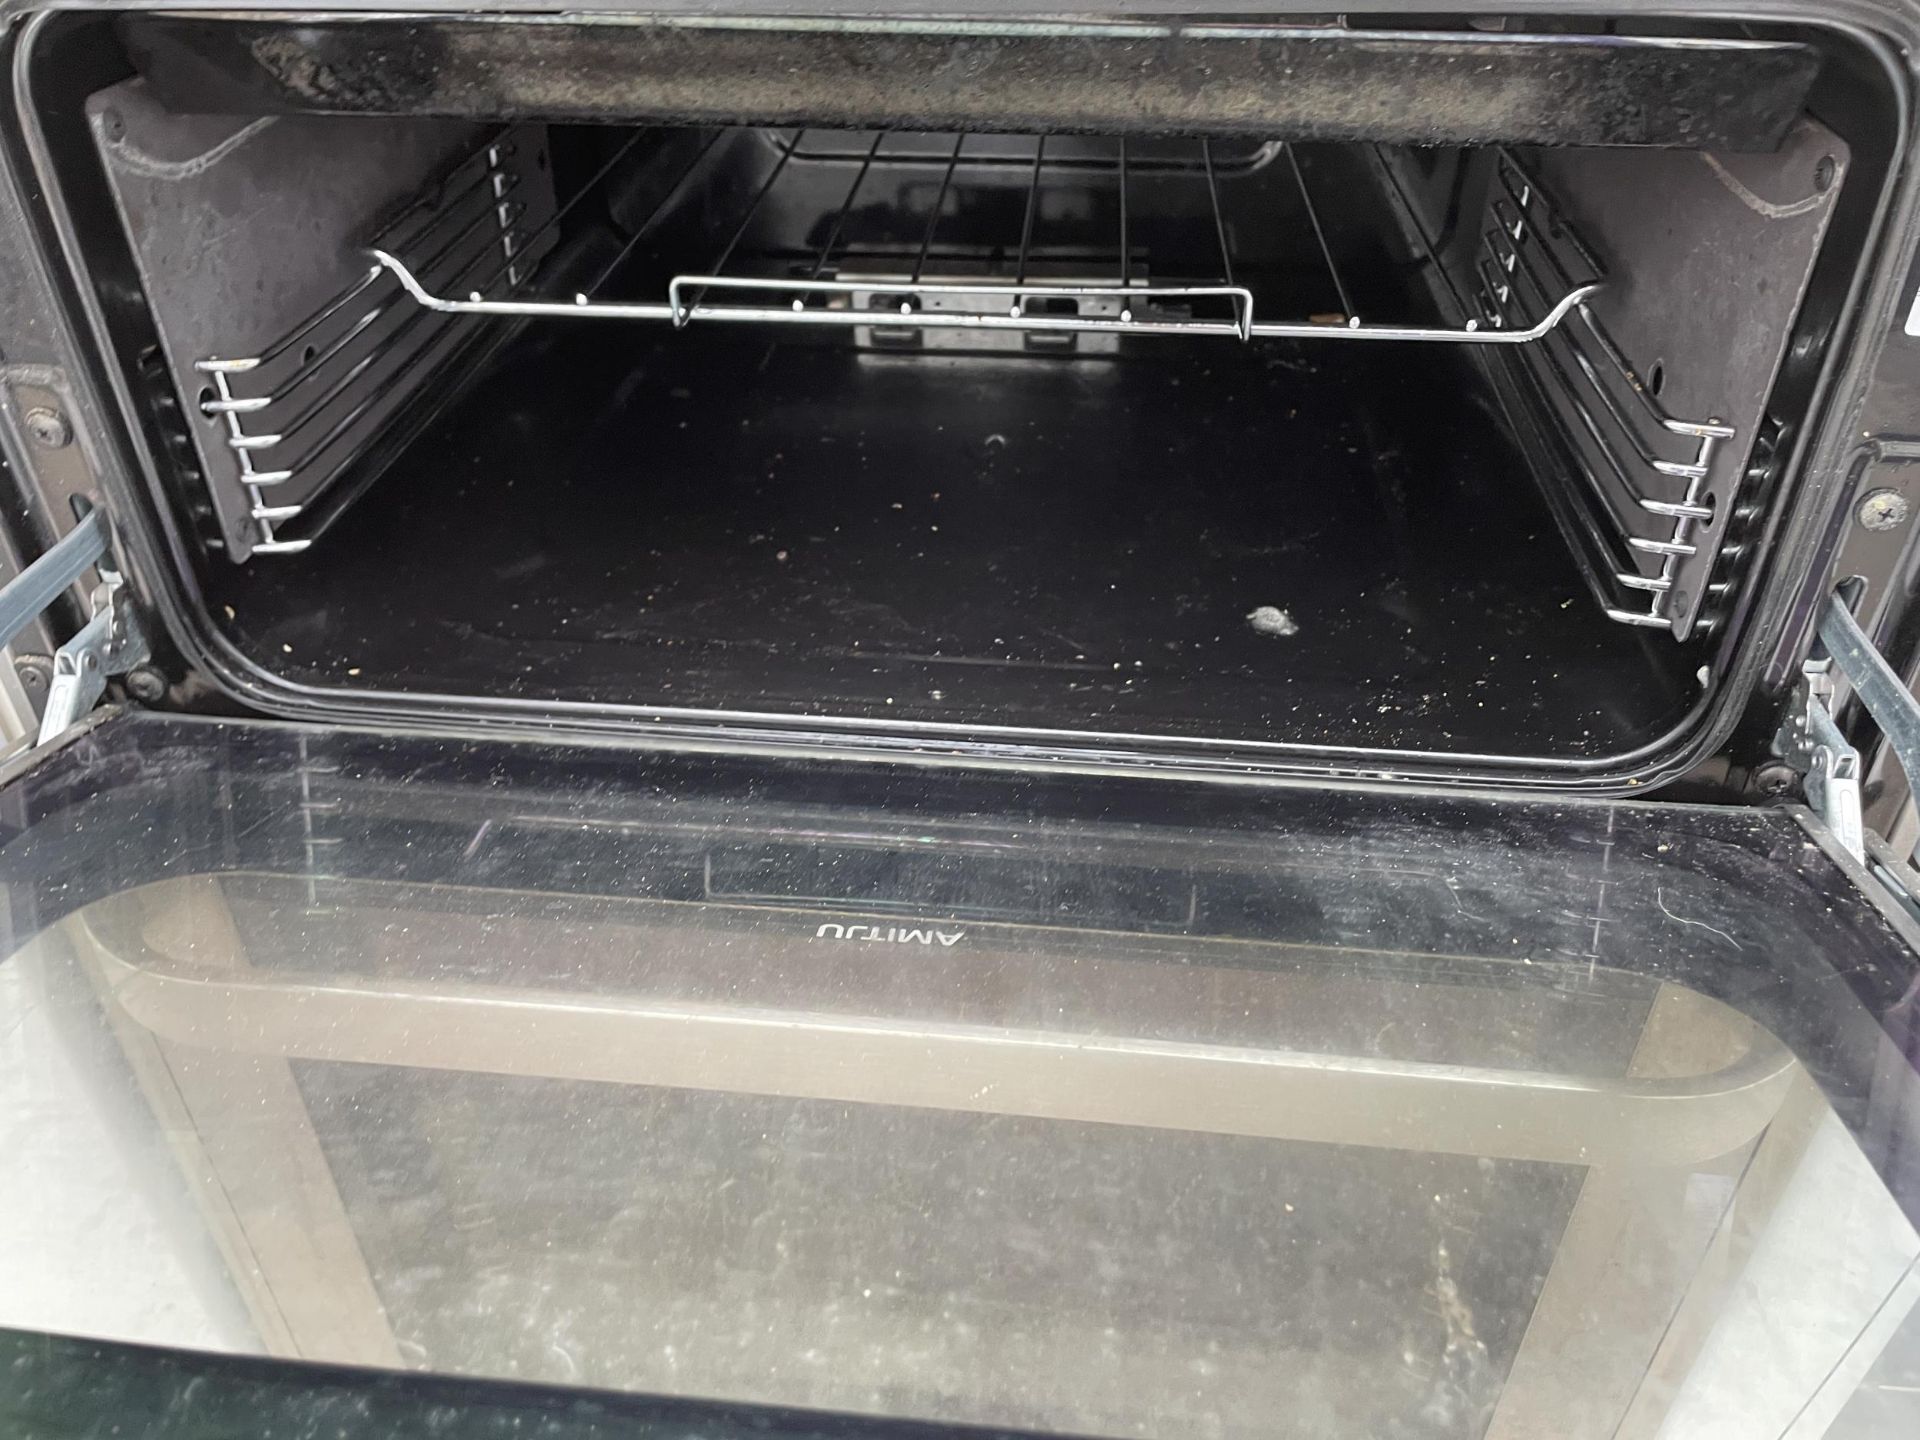 A SILVER HOTPOINT GAS OVEN AND HOB - Image 3 of 4